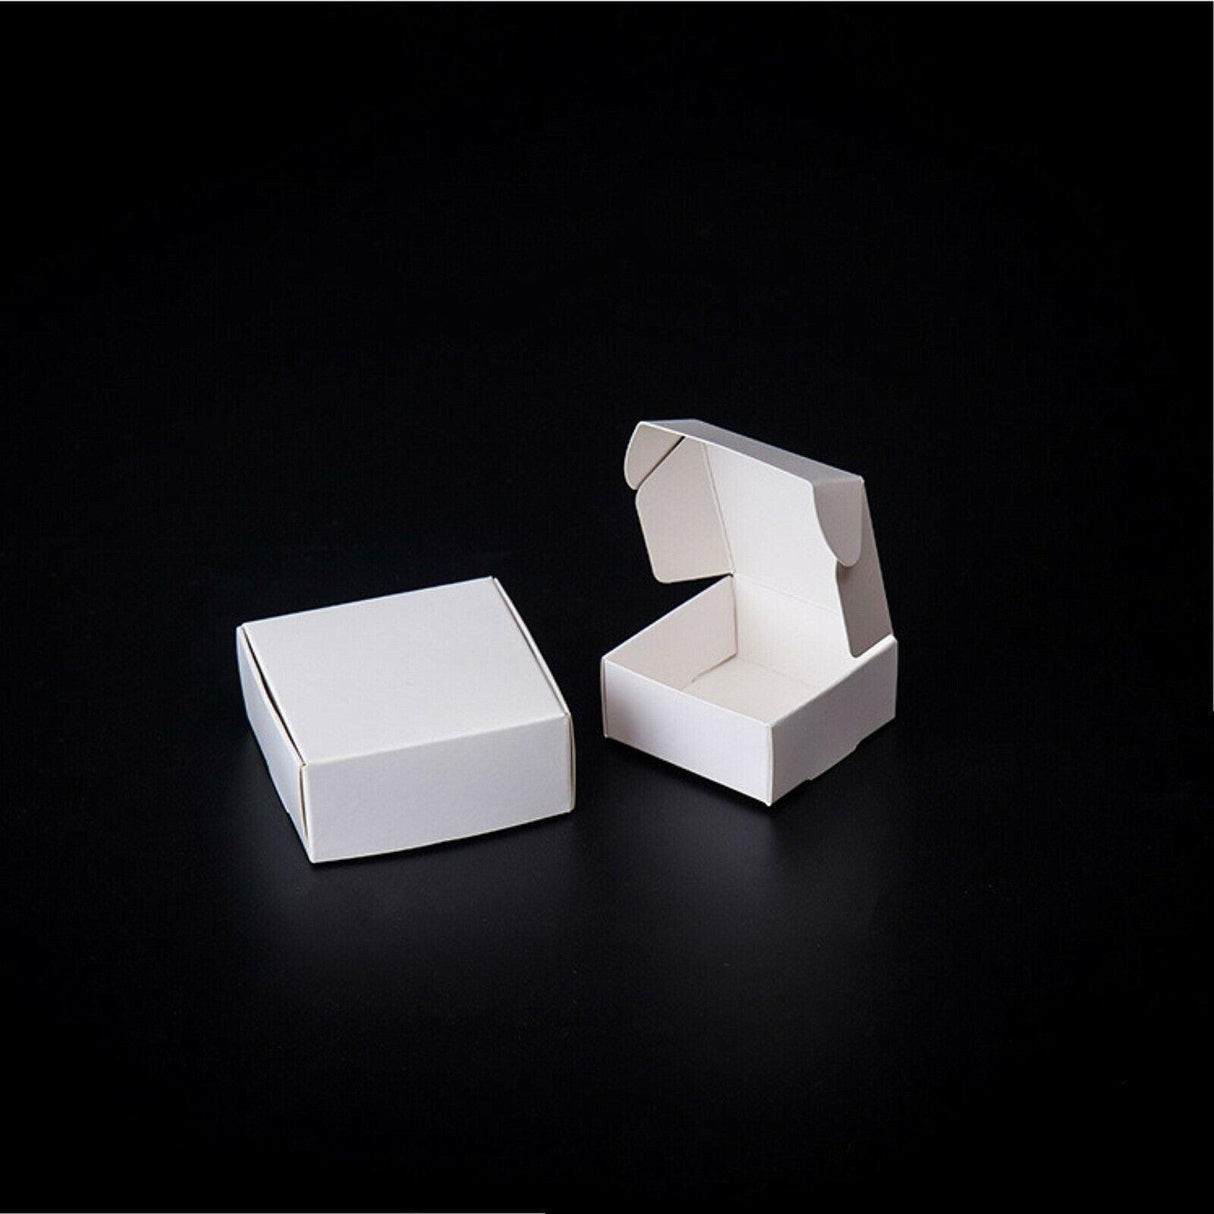 Front view of a high-quality paper box in a minimalistic design